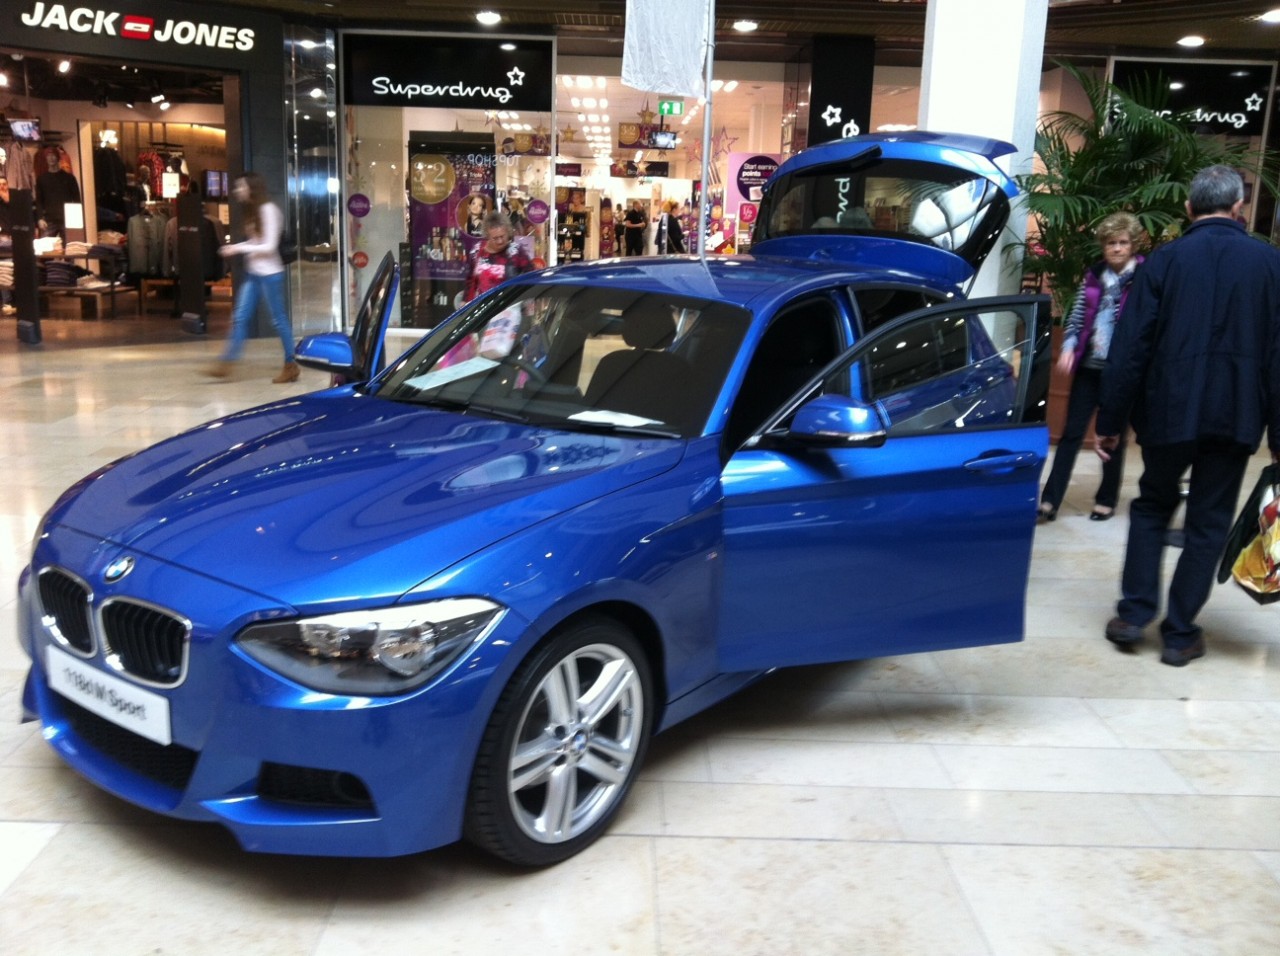 BMW Showcased two models the 2 series active tourer and the 1 series 118d